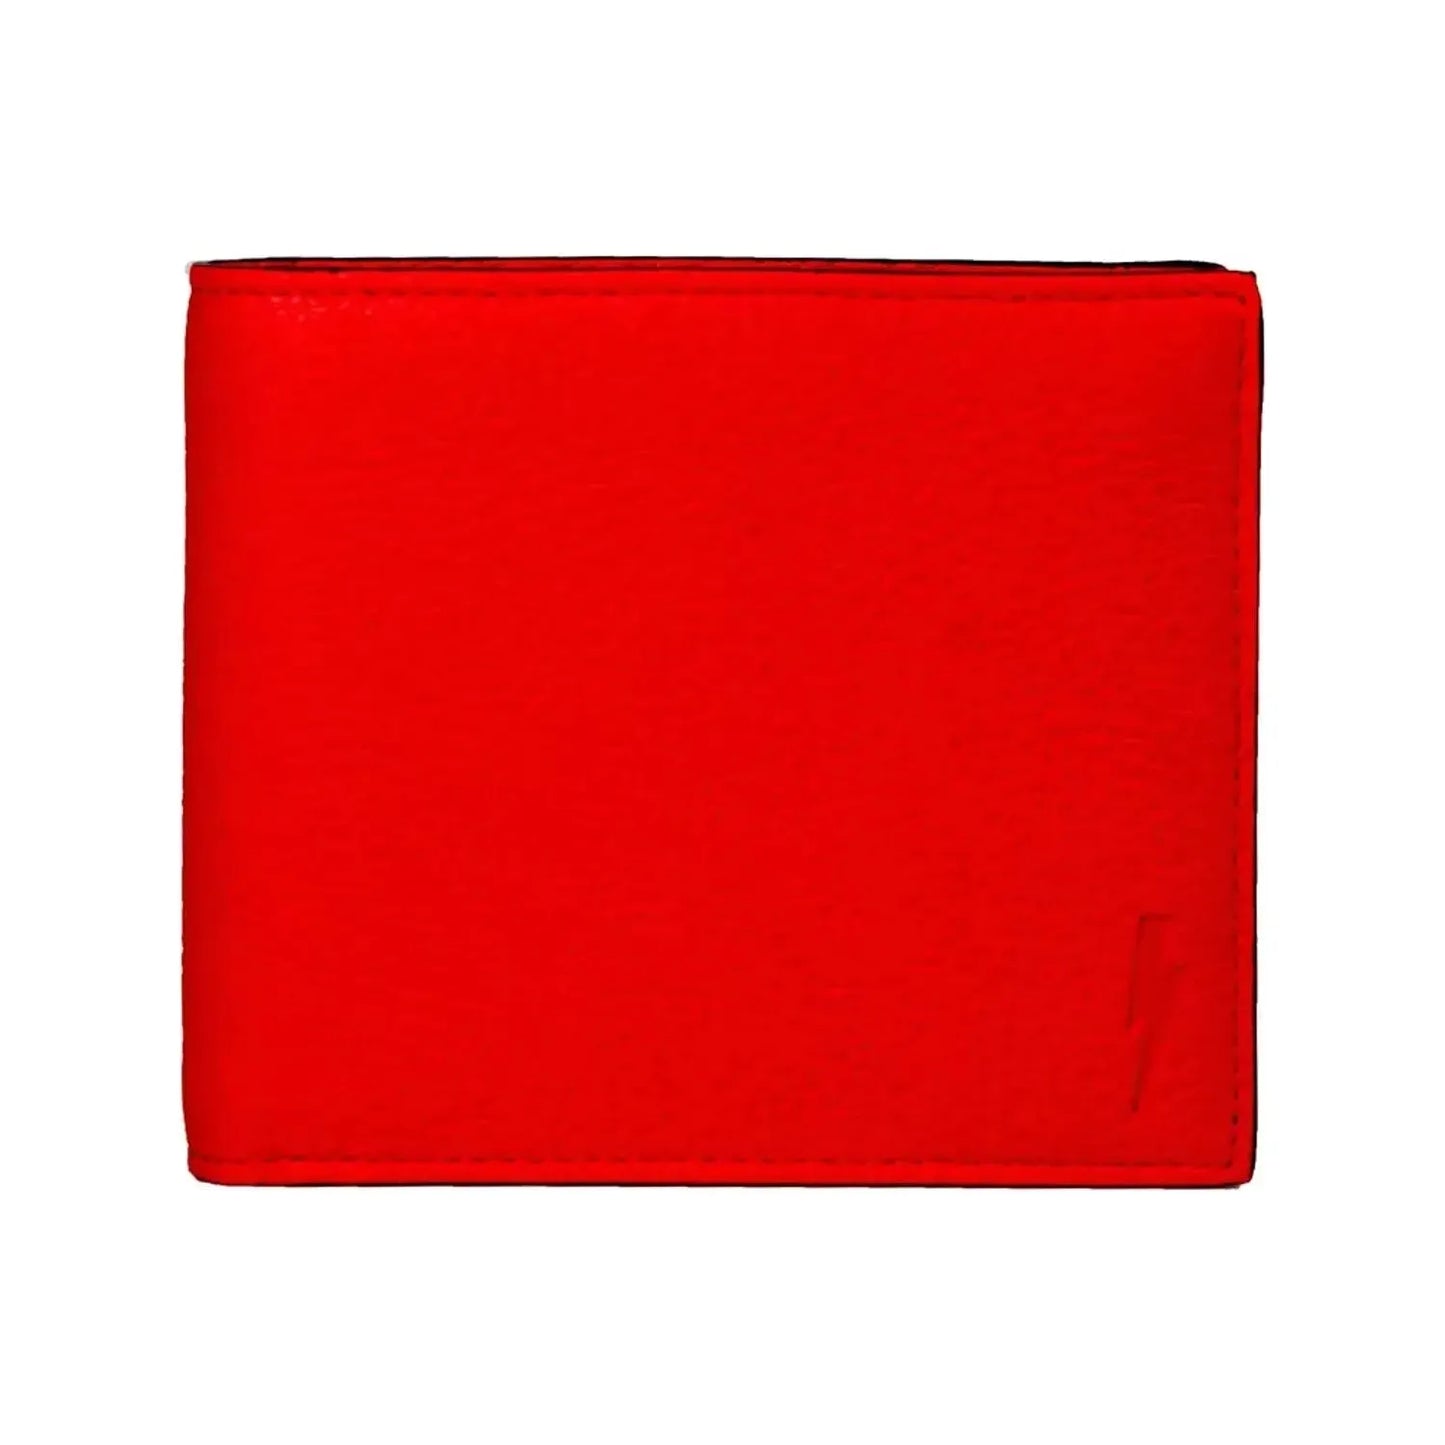 Neil Barrett Sleek Red Leather Men's Wallet red-wallet stock_product_image_21051_2059841467-25-8a60622a-617.webp